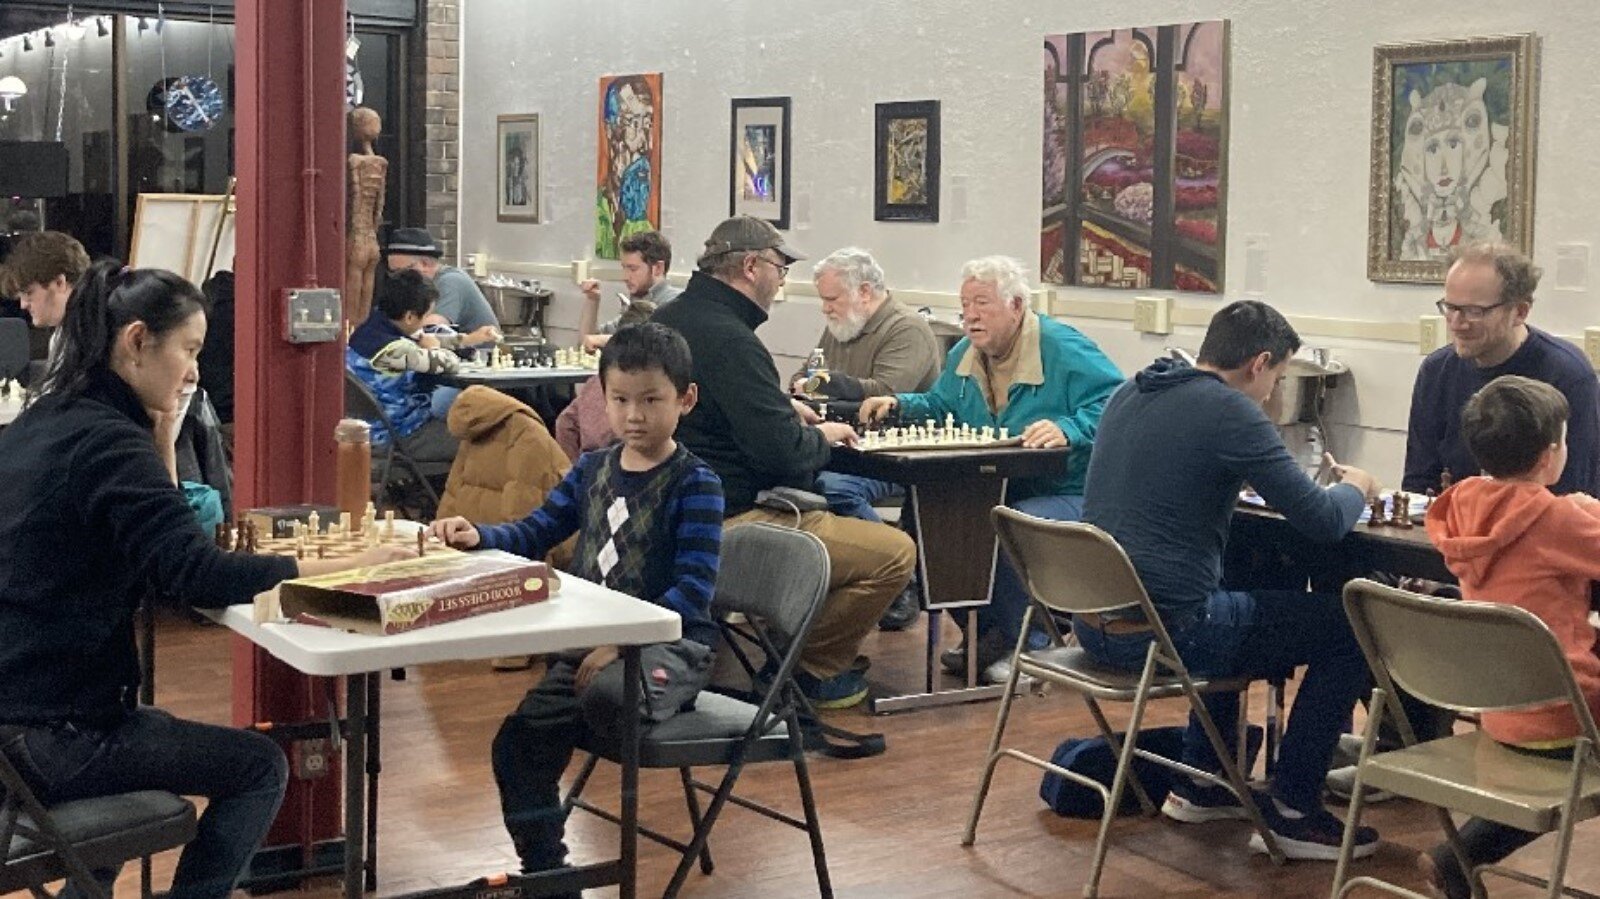 The Midland Chess Club meets on Thursdays from 7:00-9:00 pm at Creative 360 in downtown Midland.